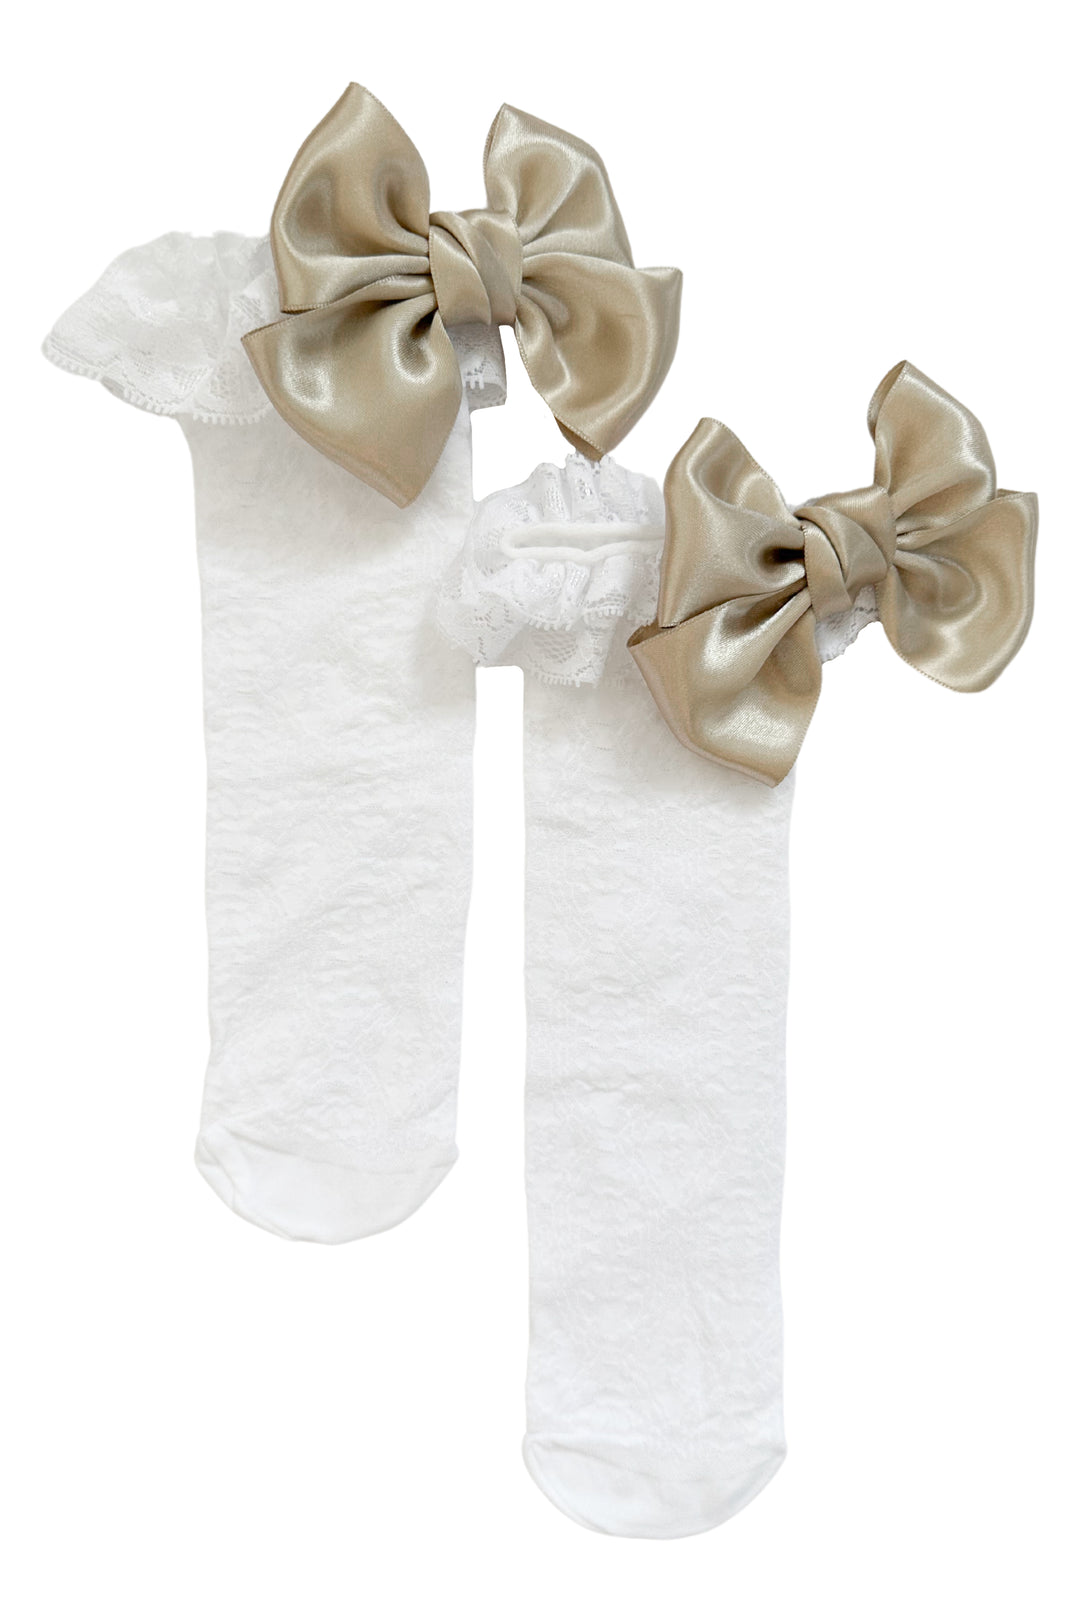 Meia Pata White Lace Knee High Socks - Champagne Bow | Millie and John